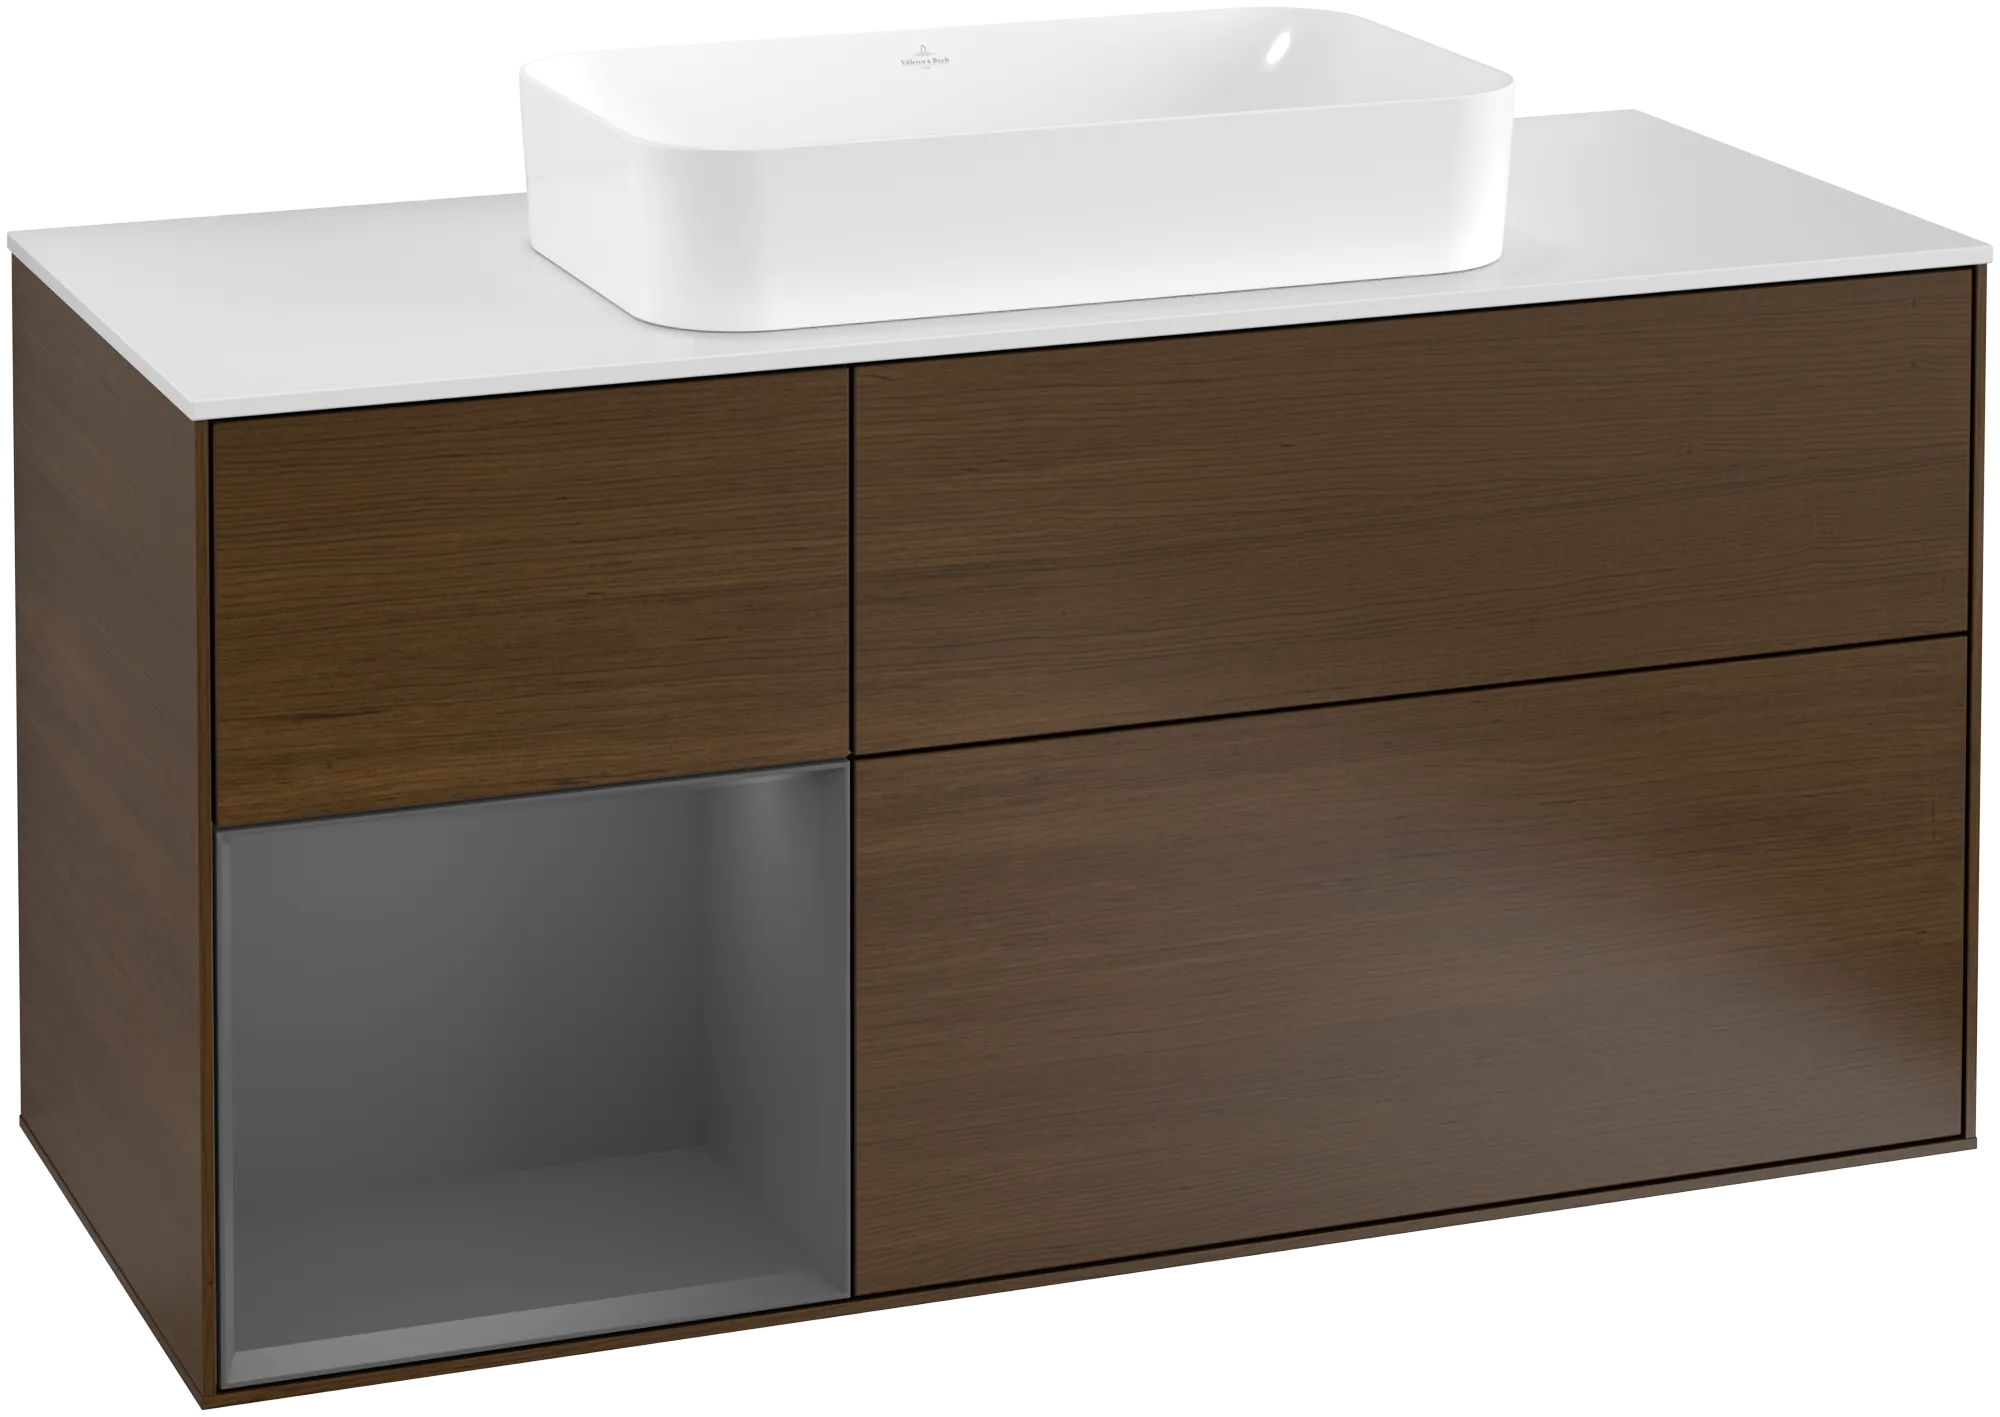 VILLEROY BOCH Finion Vanity unit, with lighting, 3 pull-out compartments, 1200 x 603 x 501 mm, Walnut Veneer / Anthracite Matt Lacquer / Glass White Matt #G291GKGN resmi